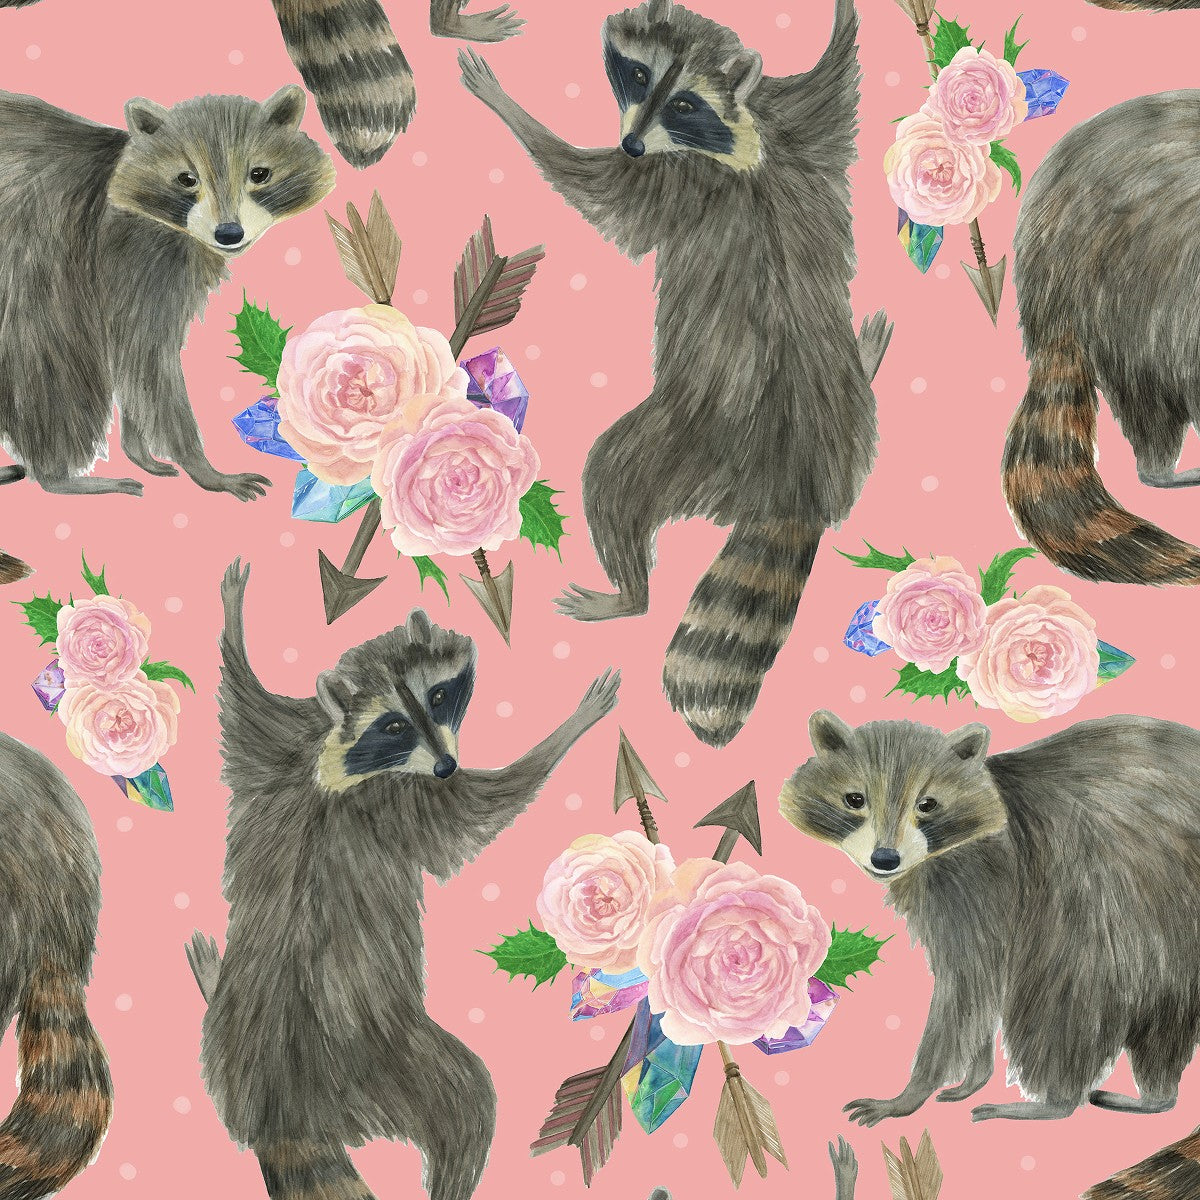 Download Raccoon wallpapers for mobile phone free Raccoon HD pictures